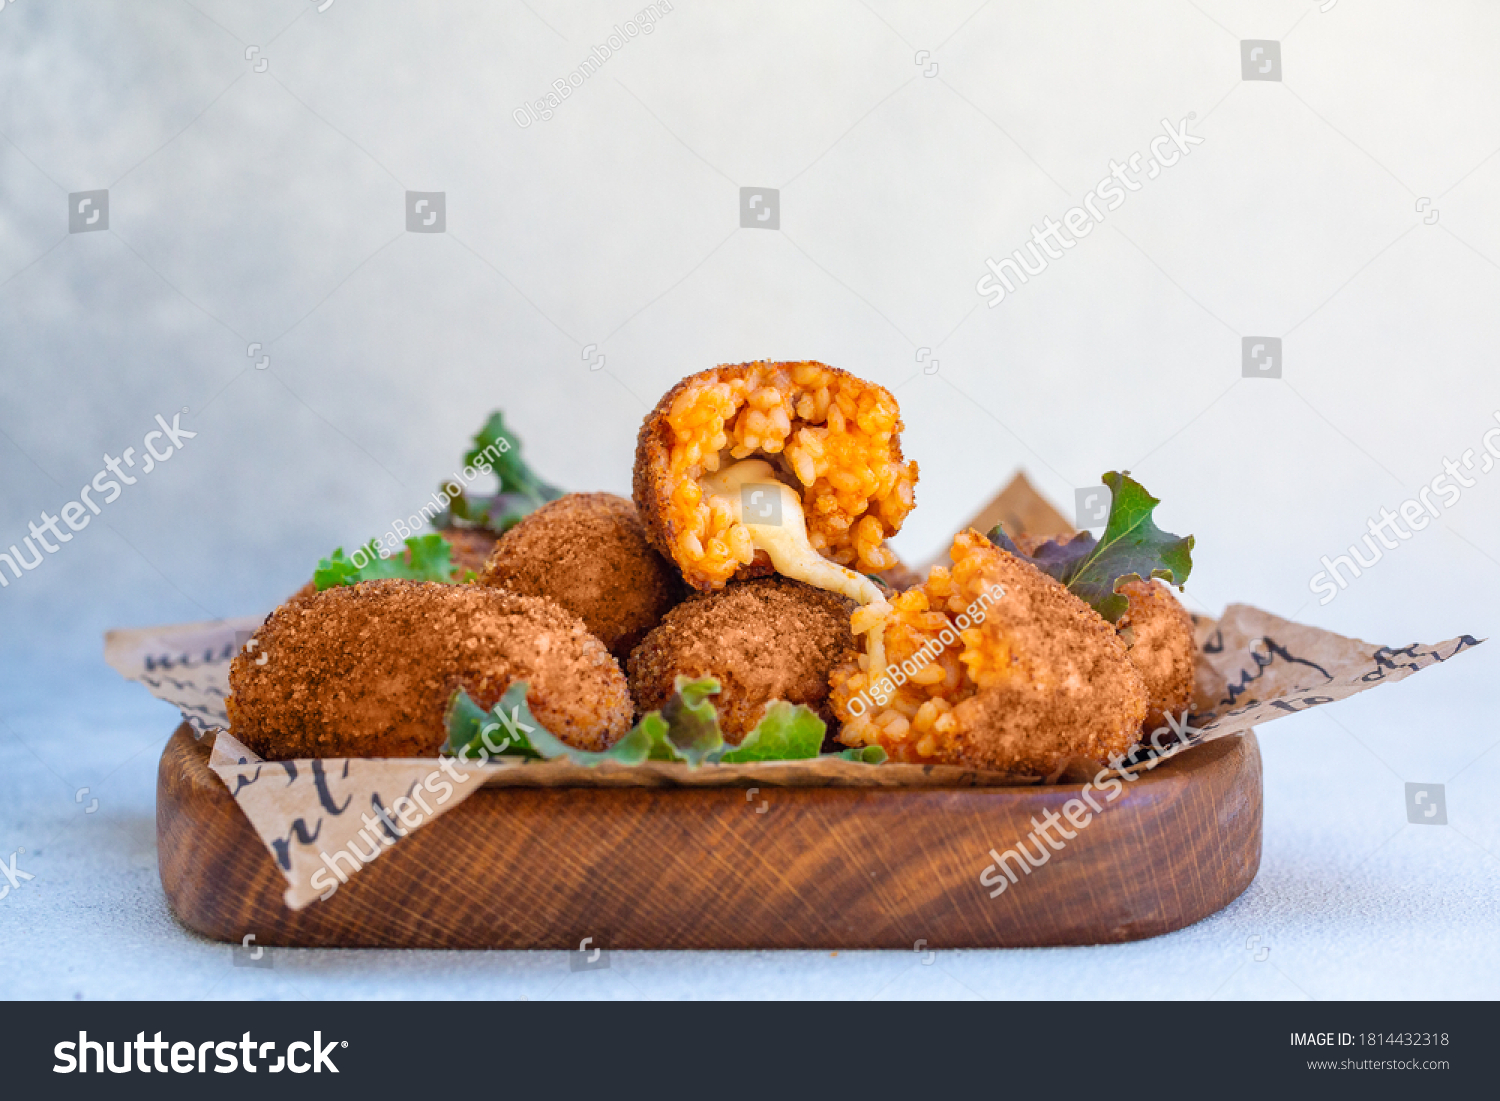 Rice balls stuffed with mozzarella cheese and deep fried on a wooden plate. Light background. #1814432318